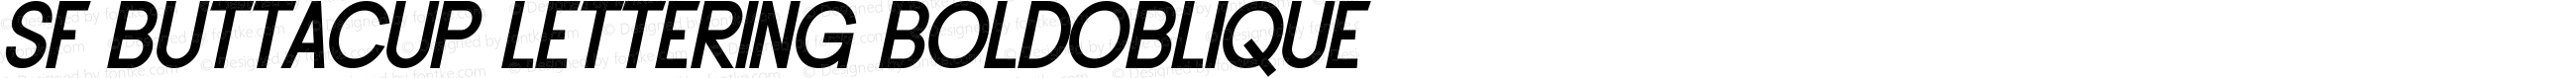 SF Buttacup Lettering Bold Oblique